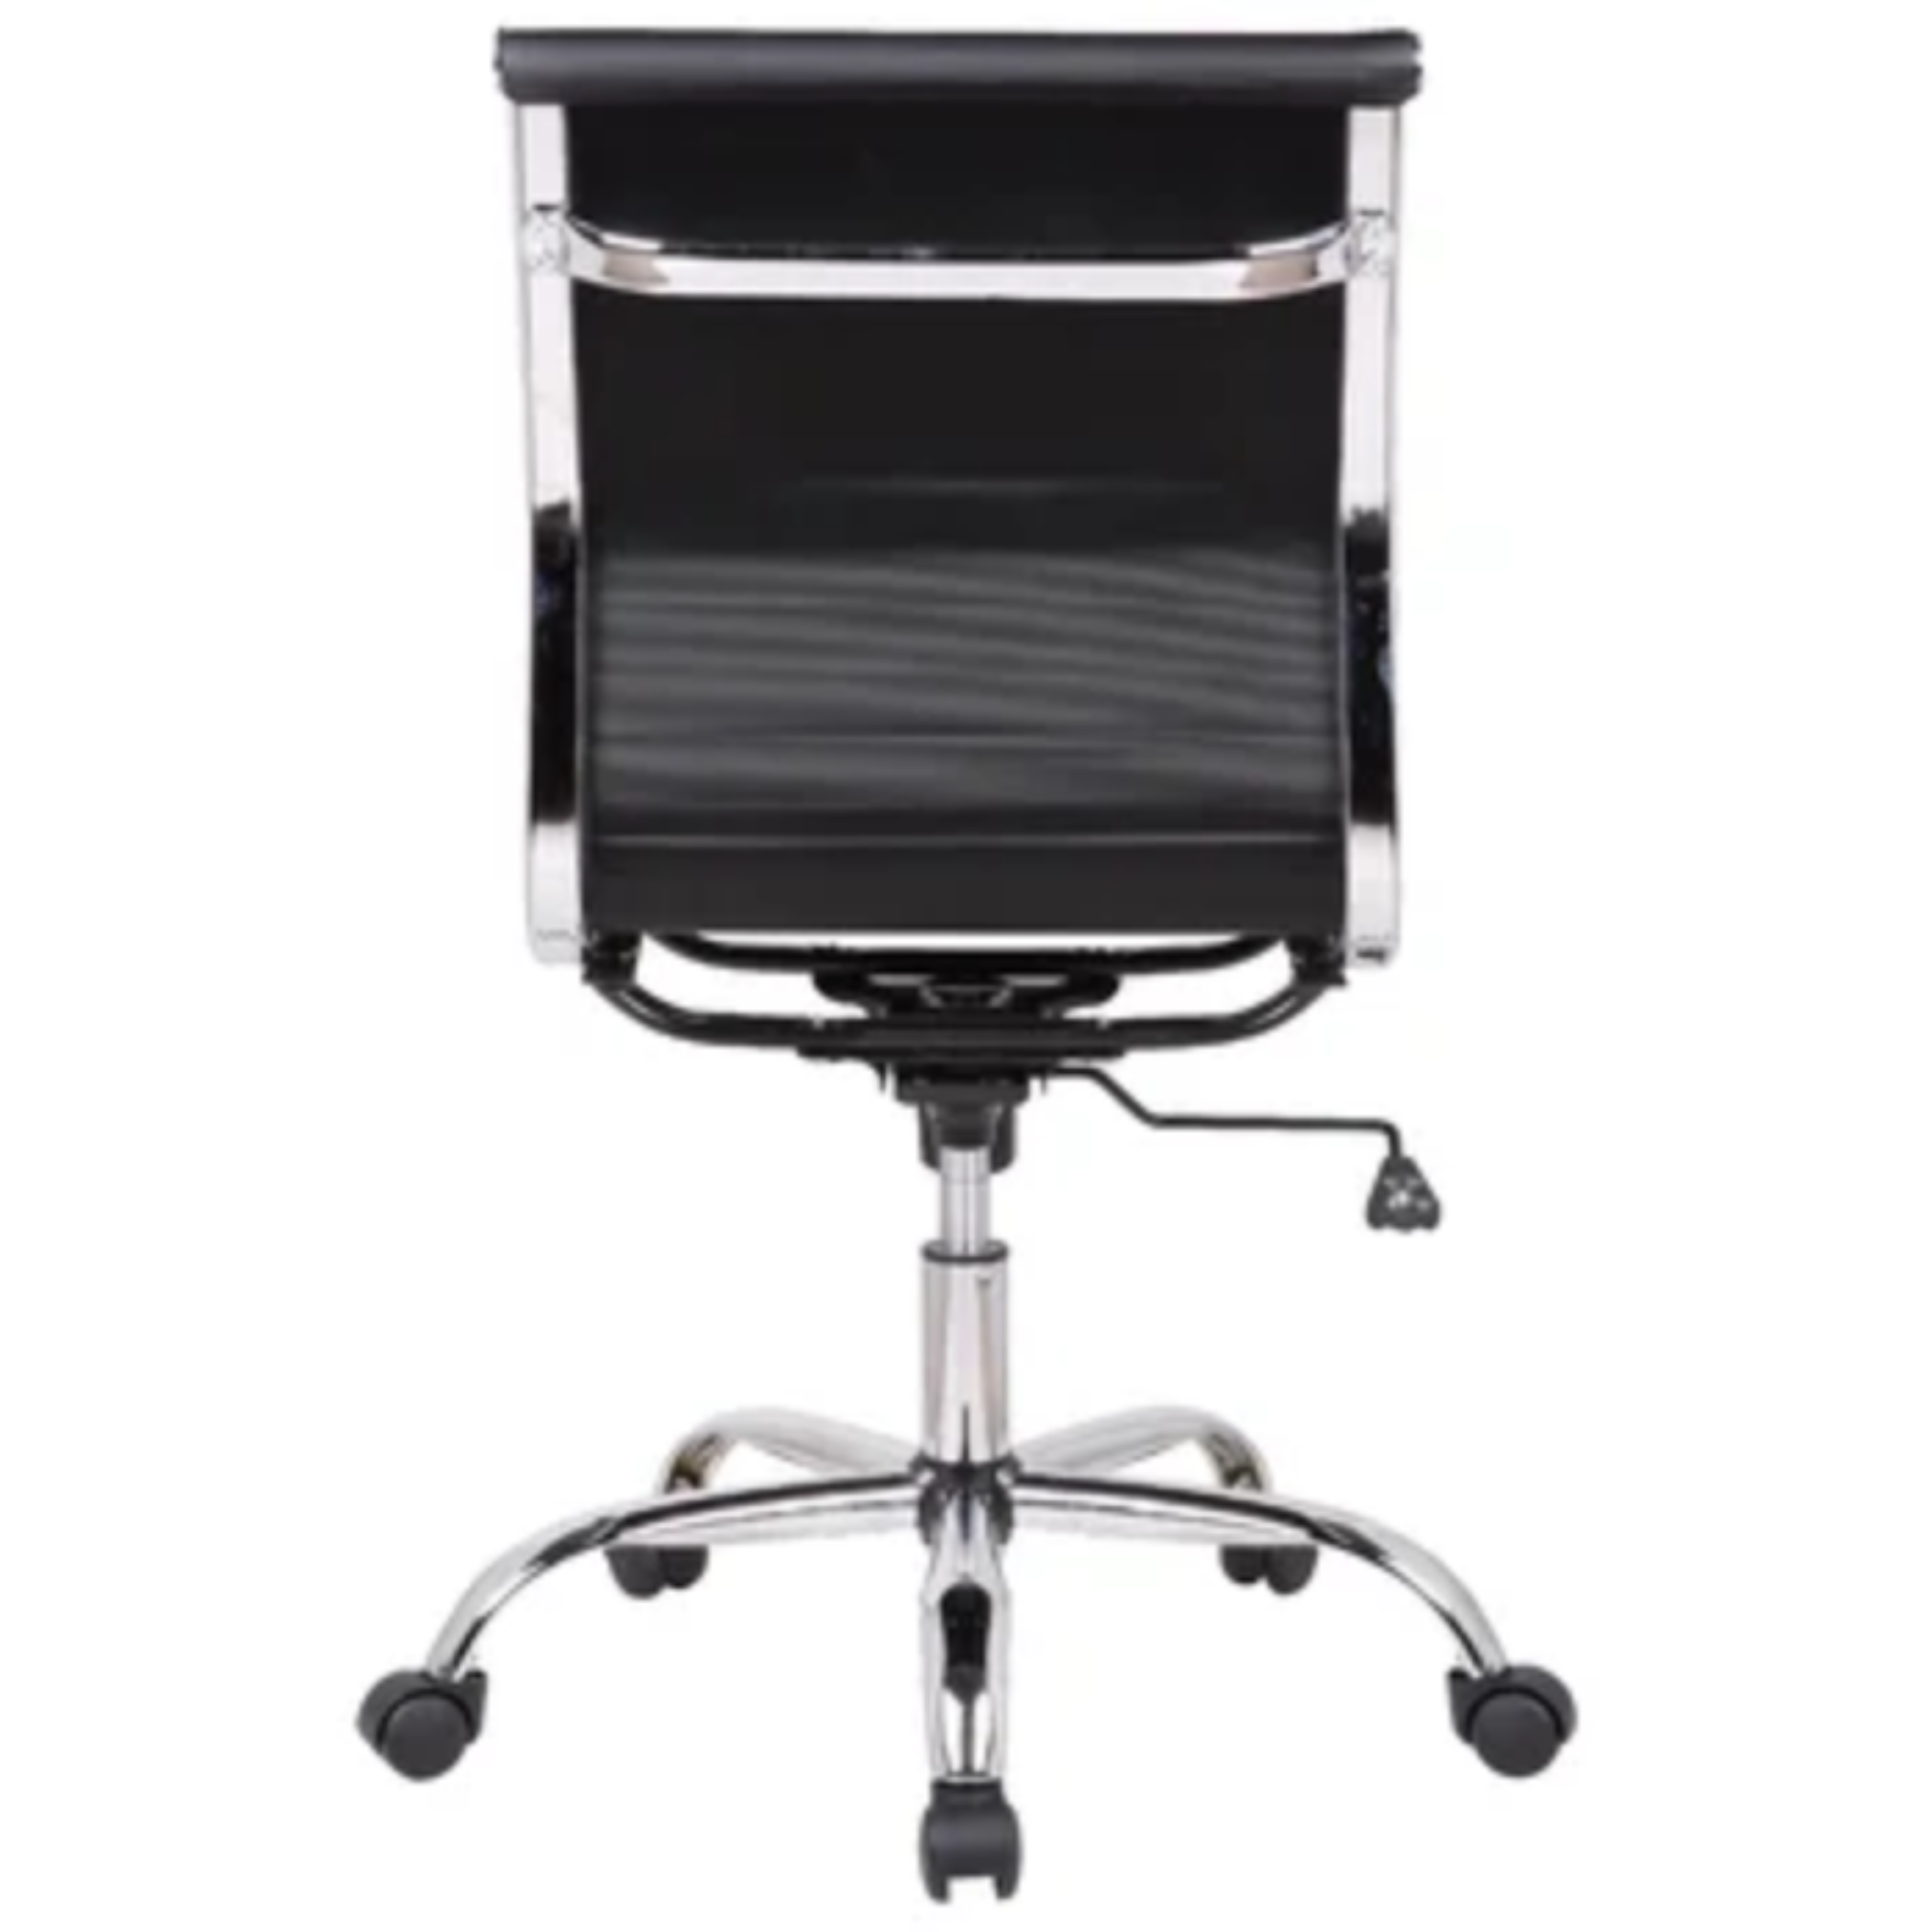 Eames Aluminum Group Management Armless Chair - Low Back